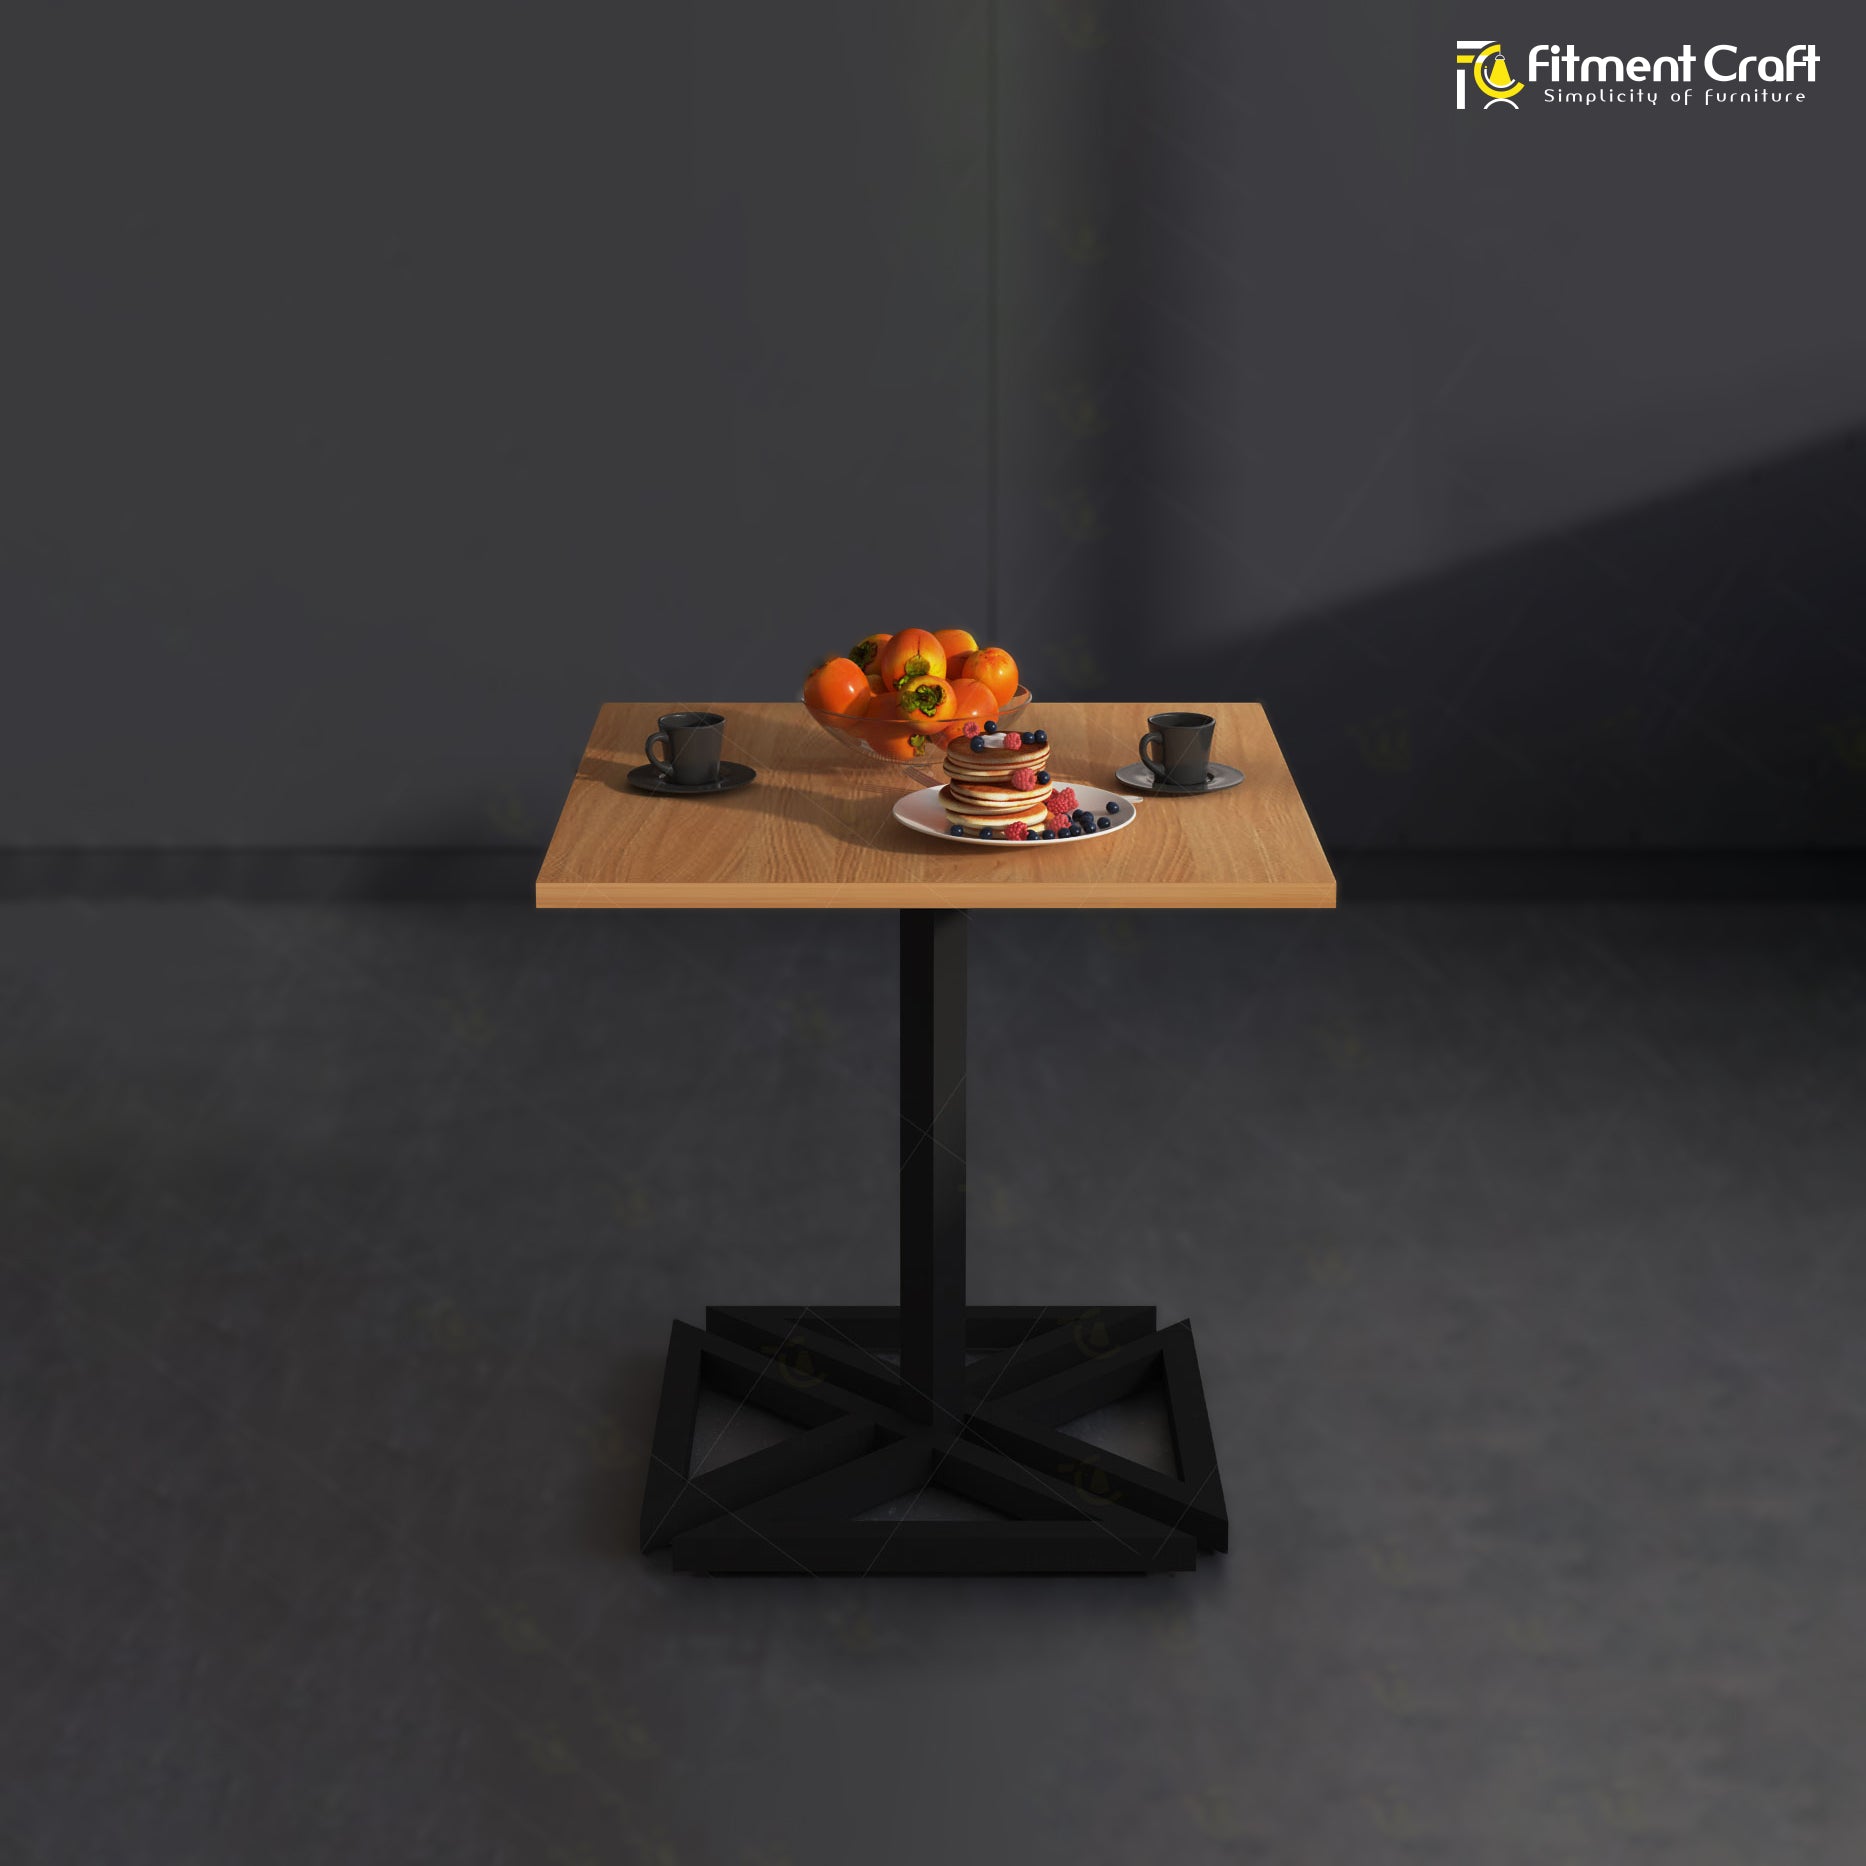 Cubic - Square Table | TV26-002